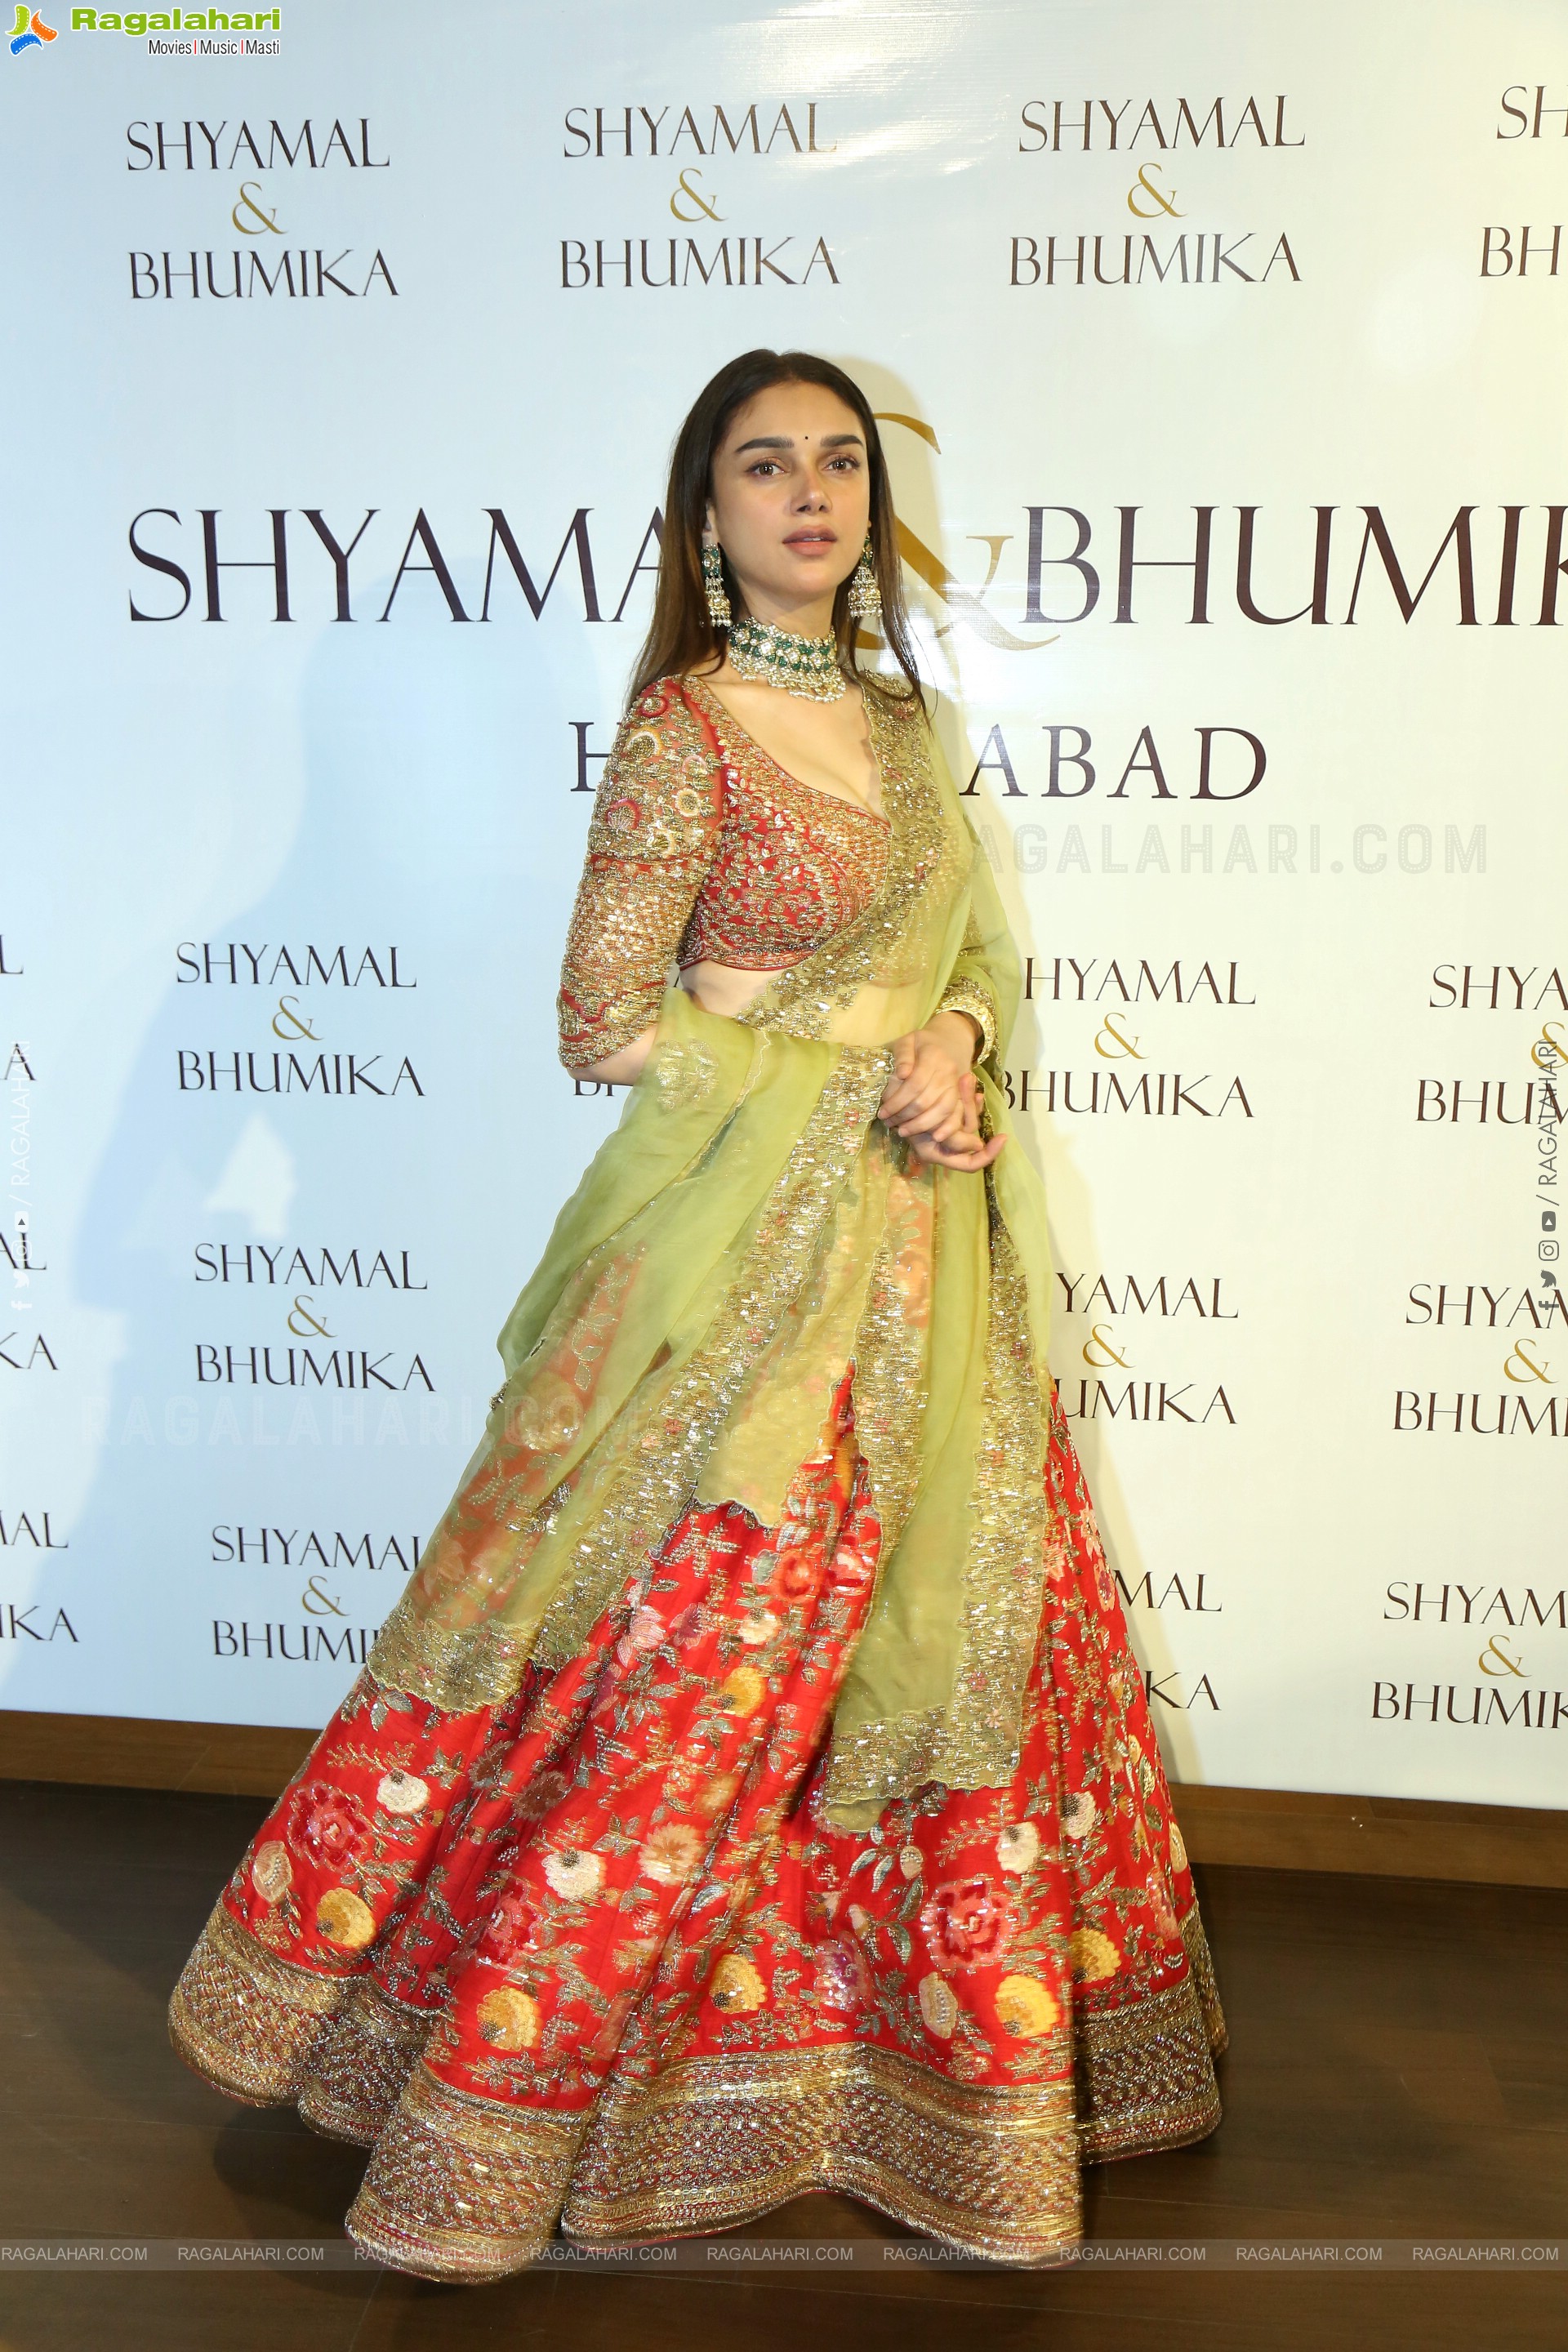 Shyamal Bhumika’s Wedding Couture Collection 2022 Launch in Hyderabad